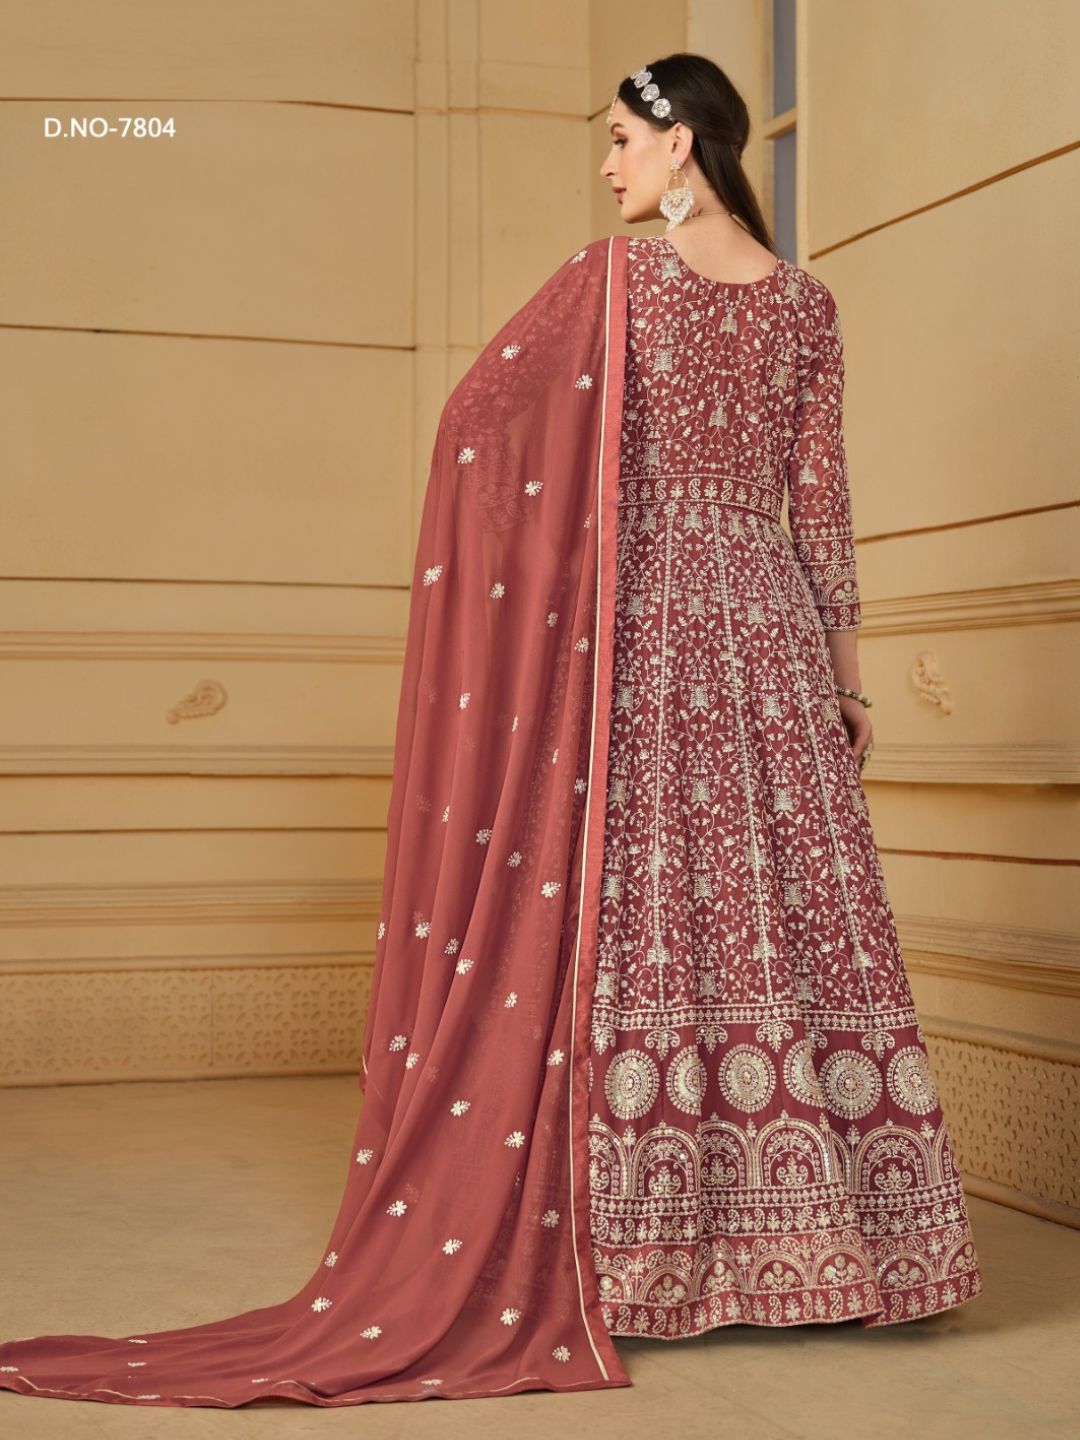 Georgette Embroidered Bollywood Salwar Kameez in Beige and Brown with Stone work-81988